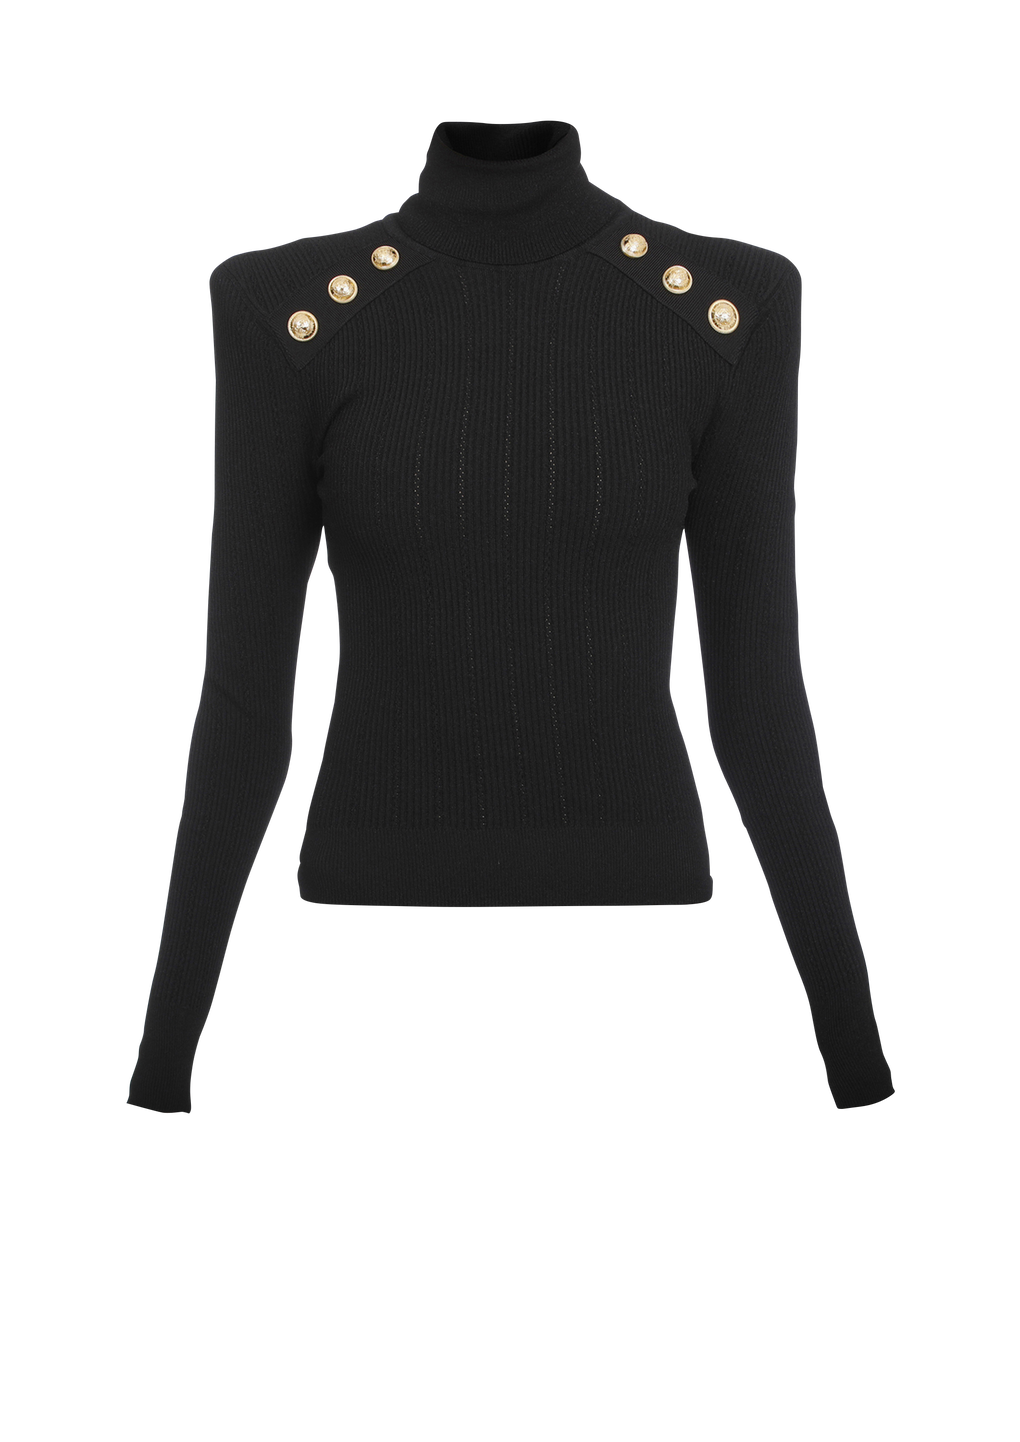 Knit sweater with gold-tone buttons, black, hi-res